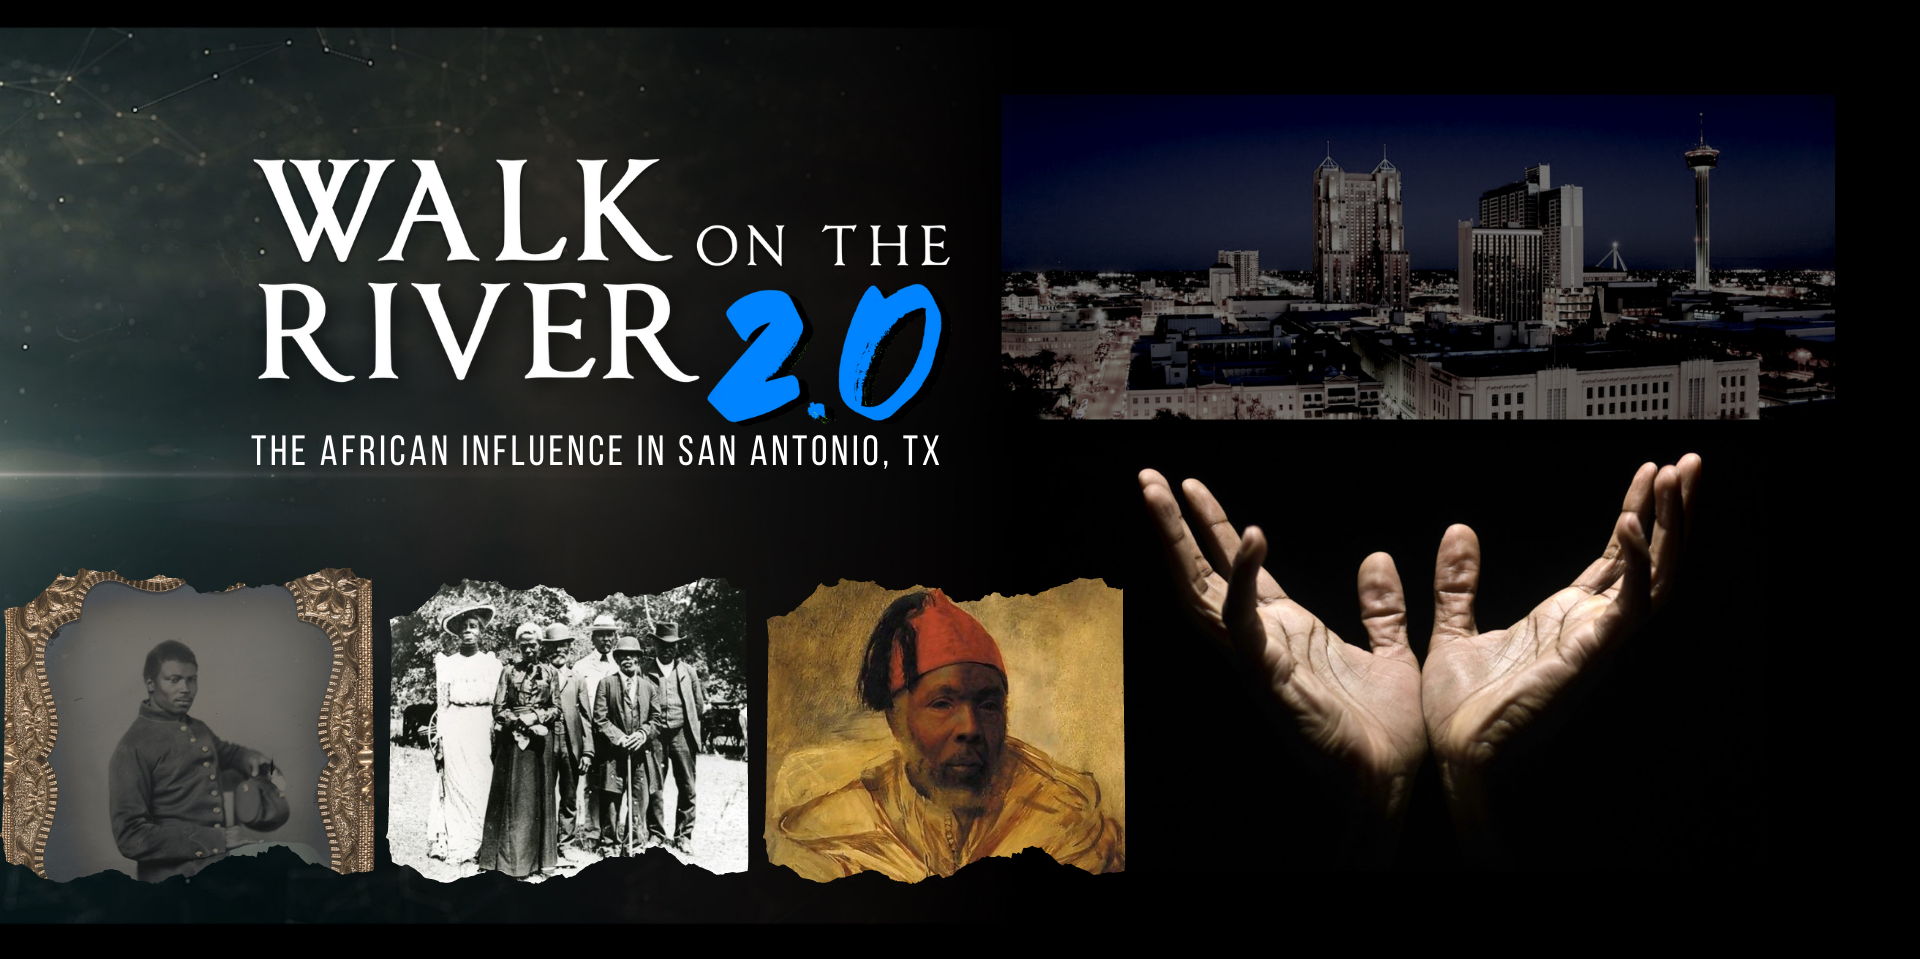 Walk on the River 2.0: The African Influence in SATX - Film Screening promotional image